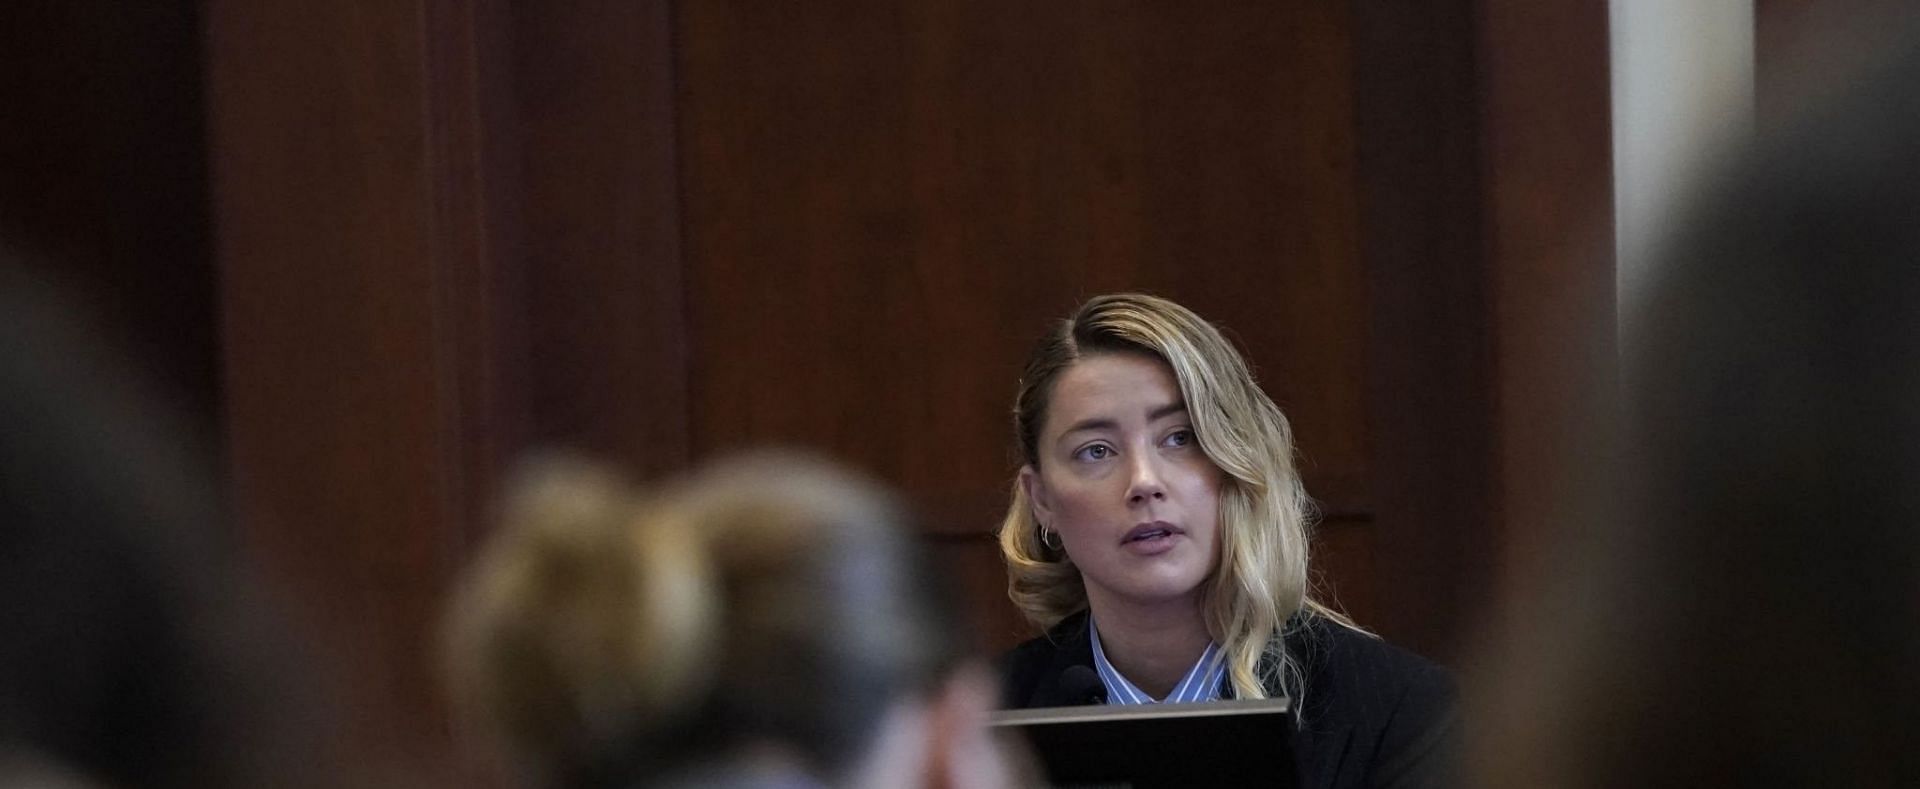 Netizens took to Twitter to react Amber Heard crying during testimony (Image via Getty Images)